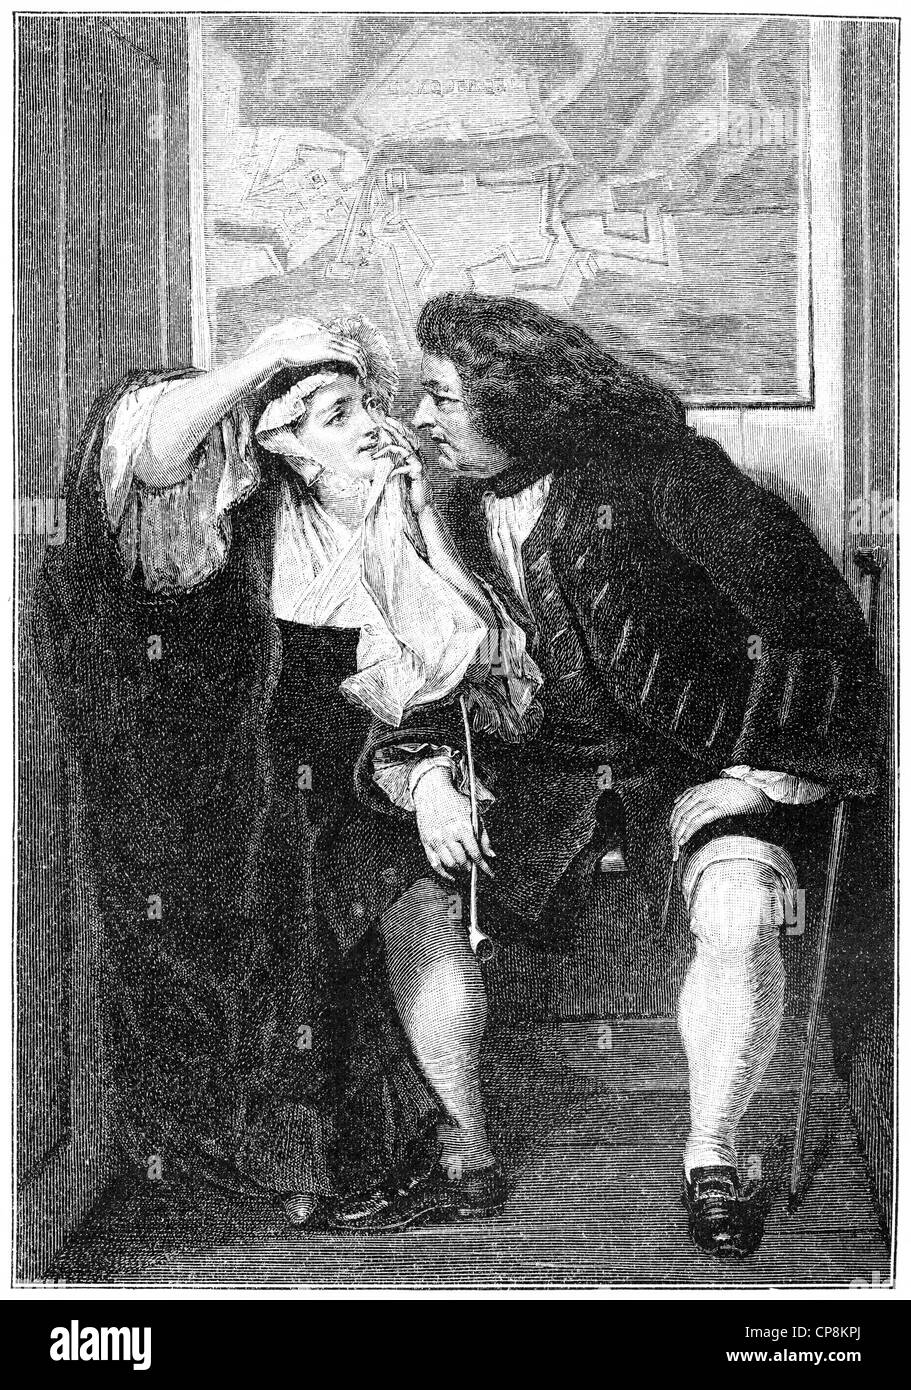 Uncle Toby and Widow Wadman, from The Life and Opinions of Tristram Shandy, Gentleman by Laurence Sterne, 1713 - 1768, an Englis Stock Photo